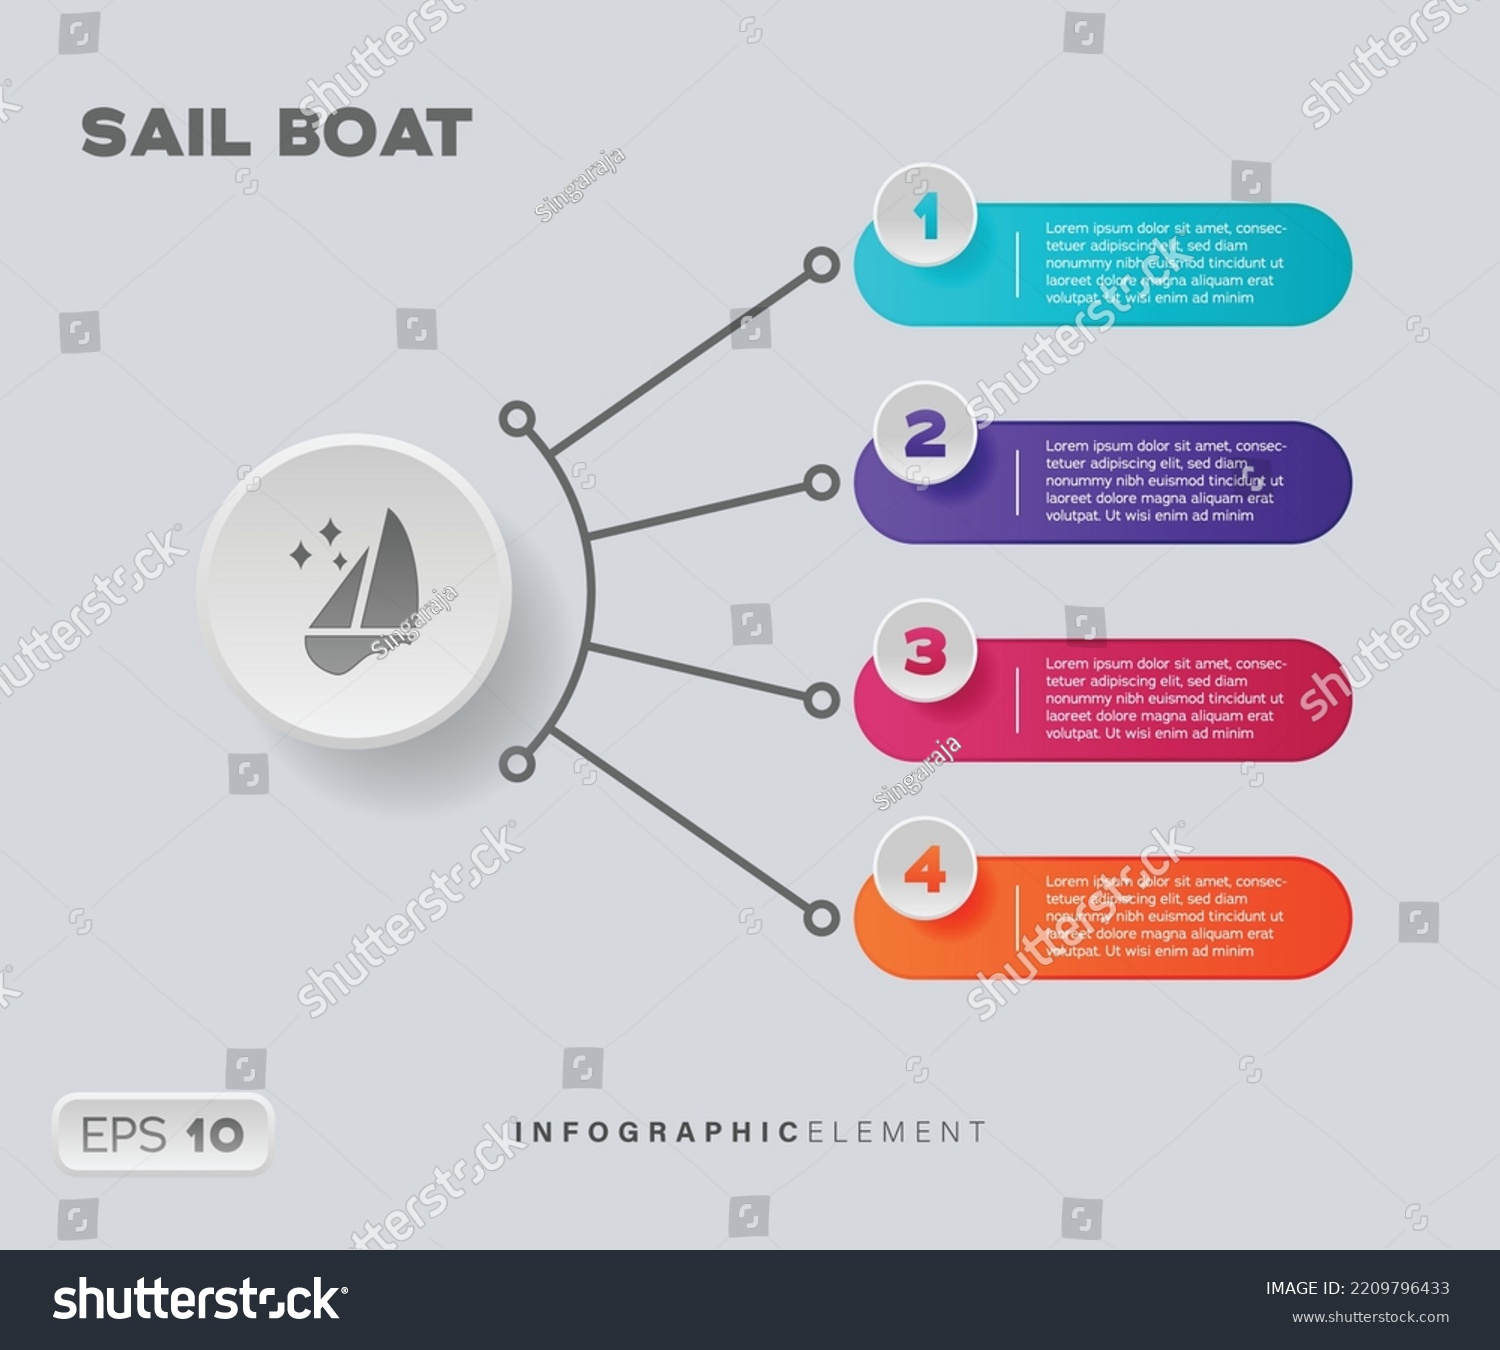 SVG of Business infographic Sailboat design template with icons and 4 steps. Can be used for workflow layout, diagrams, annual reports, web design svg